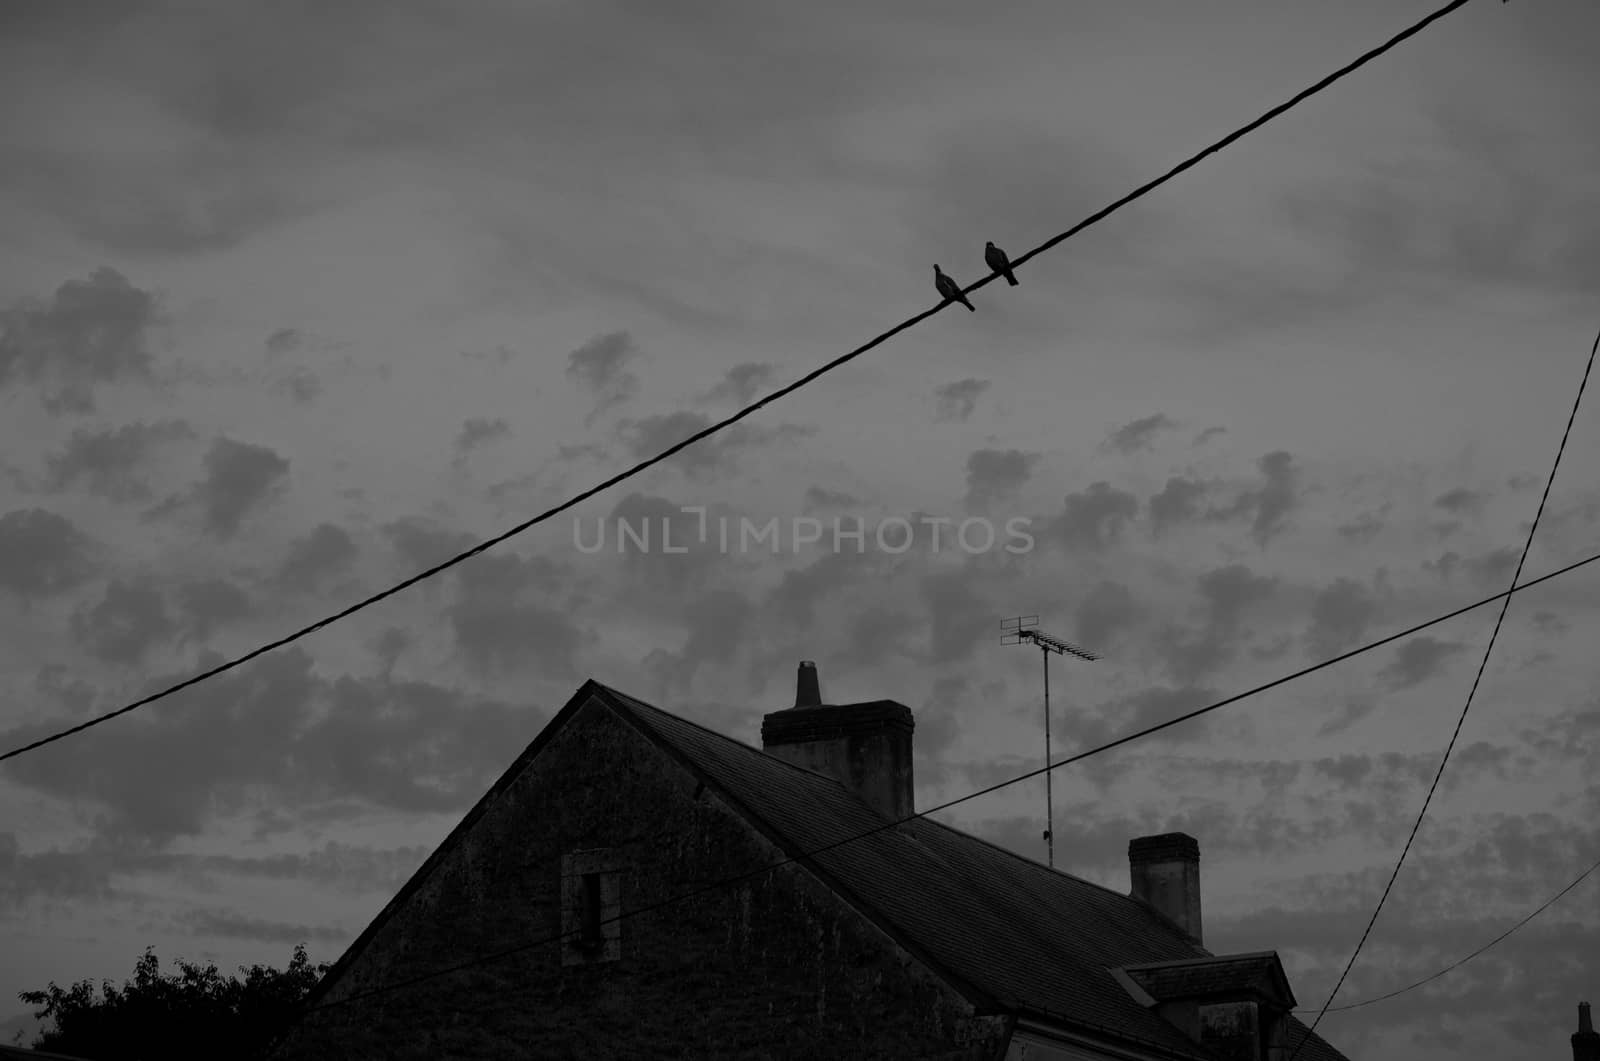 Two birds sitting on a telephone wire in a French village